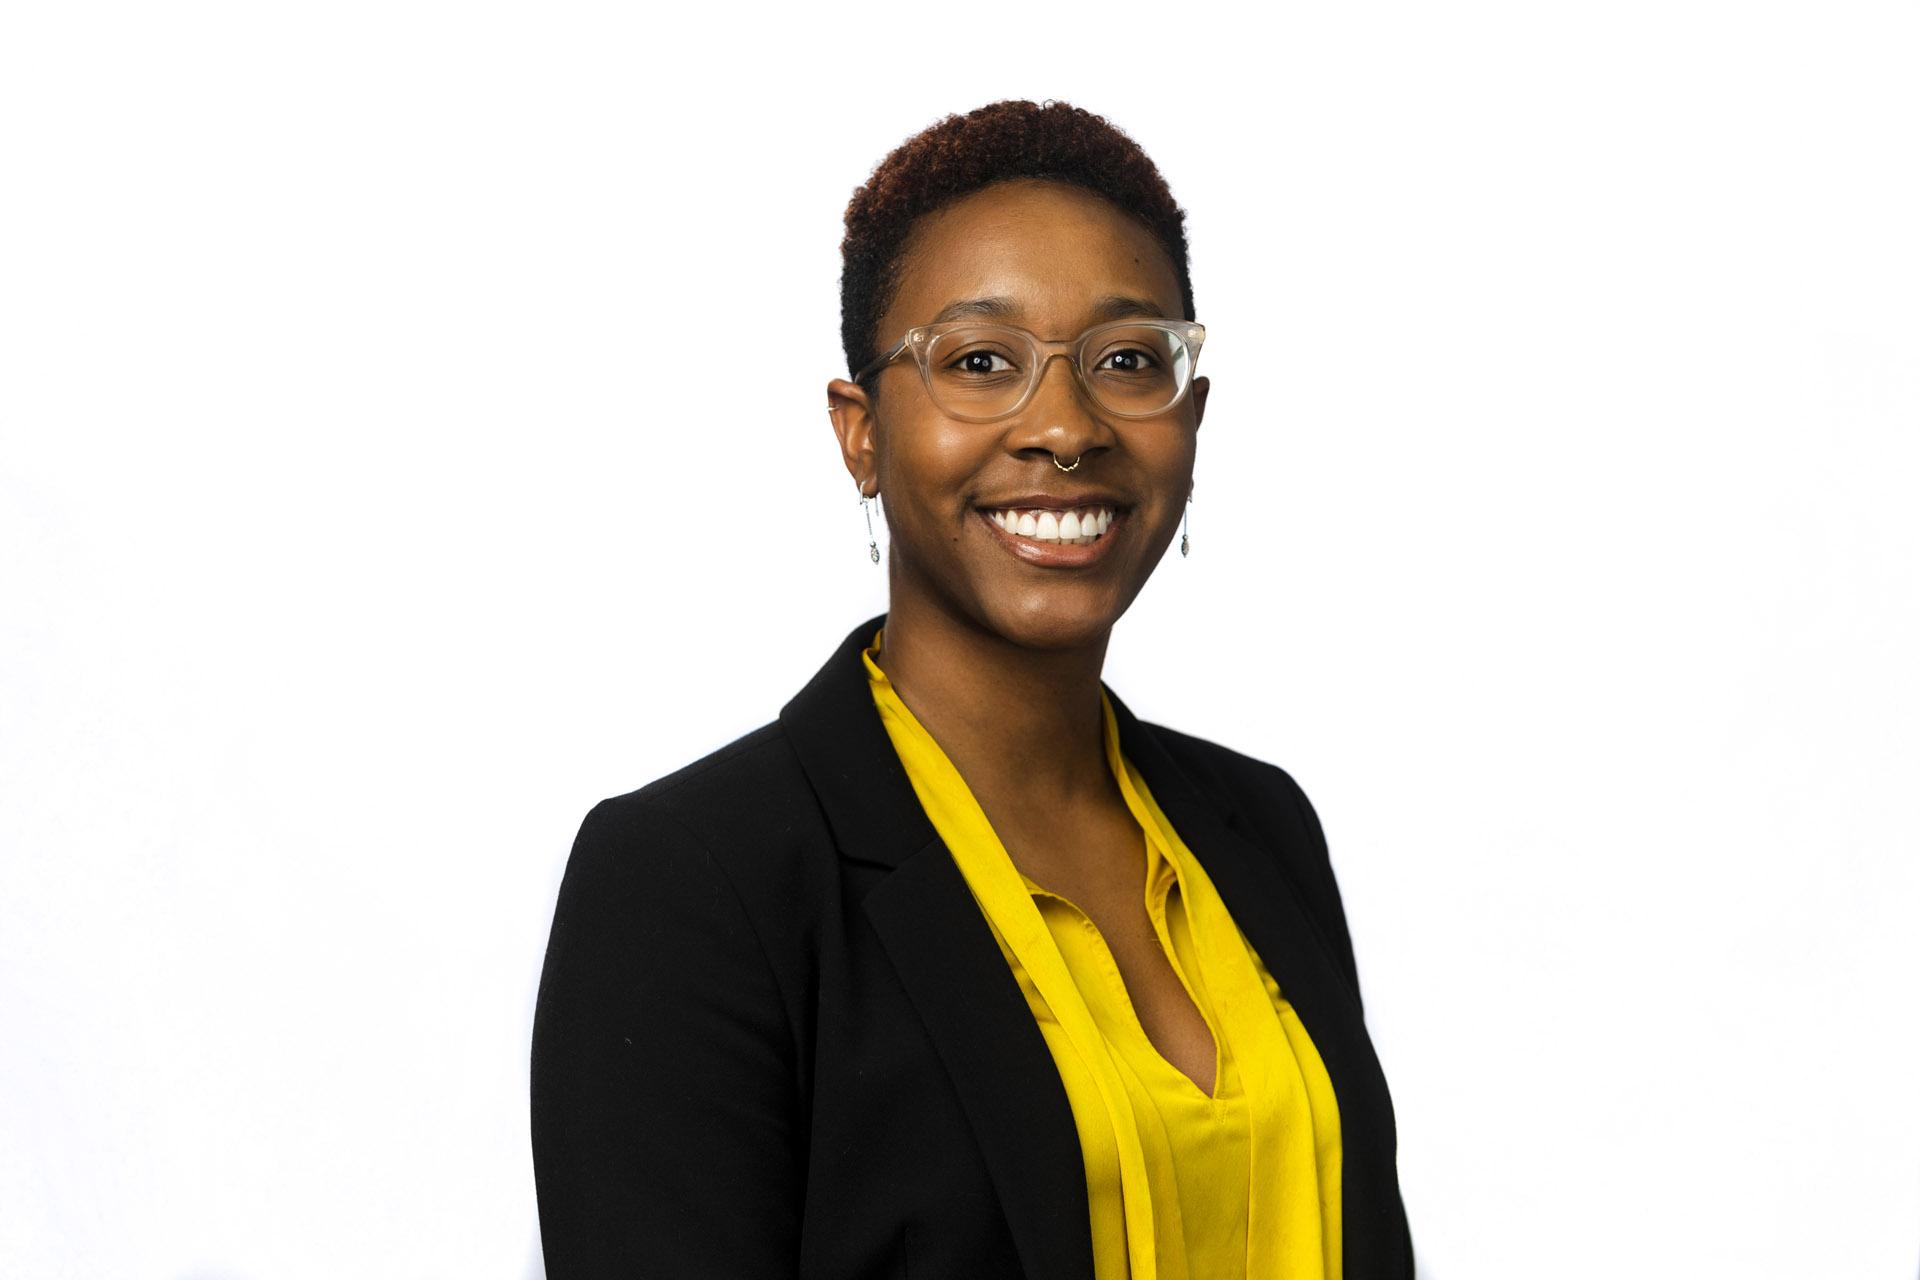 Kendra Hypolite, MSW, LSW, UCSF's new CARE Advocate for Racial Justice and Co-Director of the CARE Advocate Program